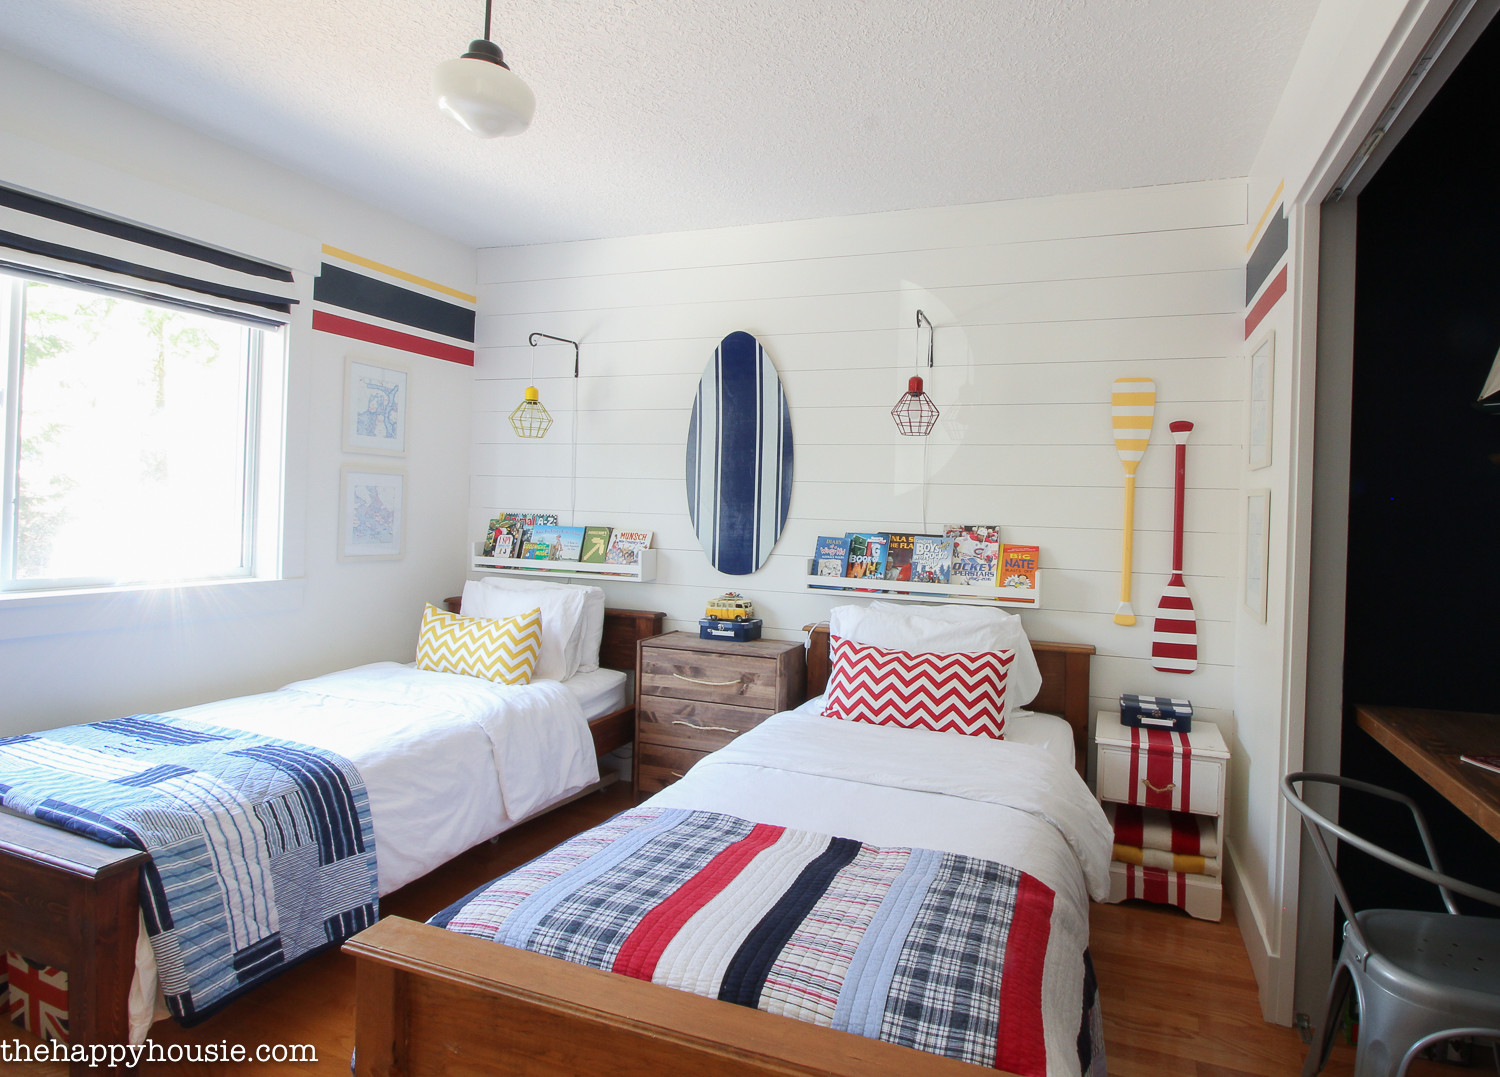 How To Organize Kids Room When It Is Small
 How to pletely Organize Kid s Bedrooms